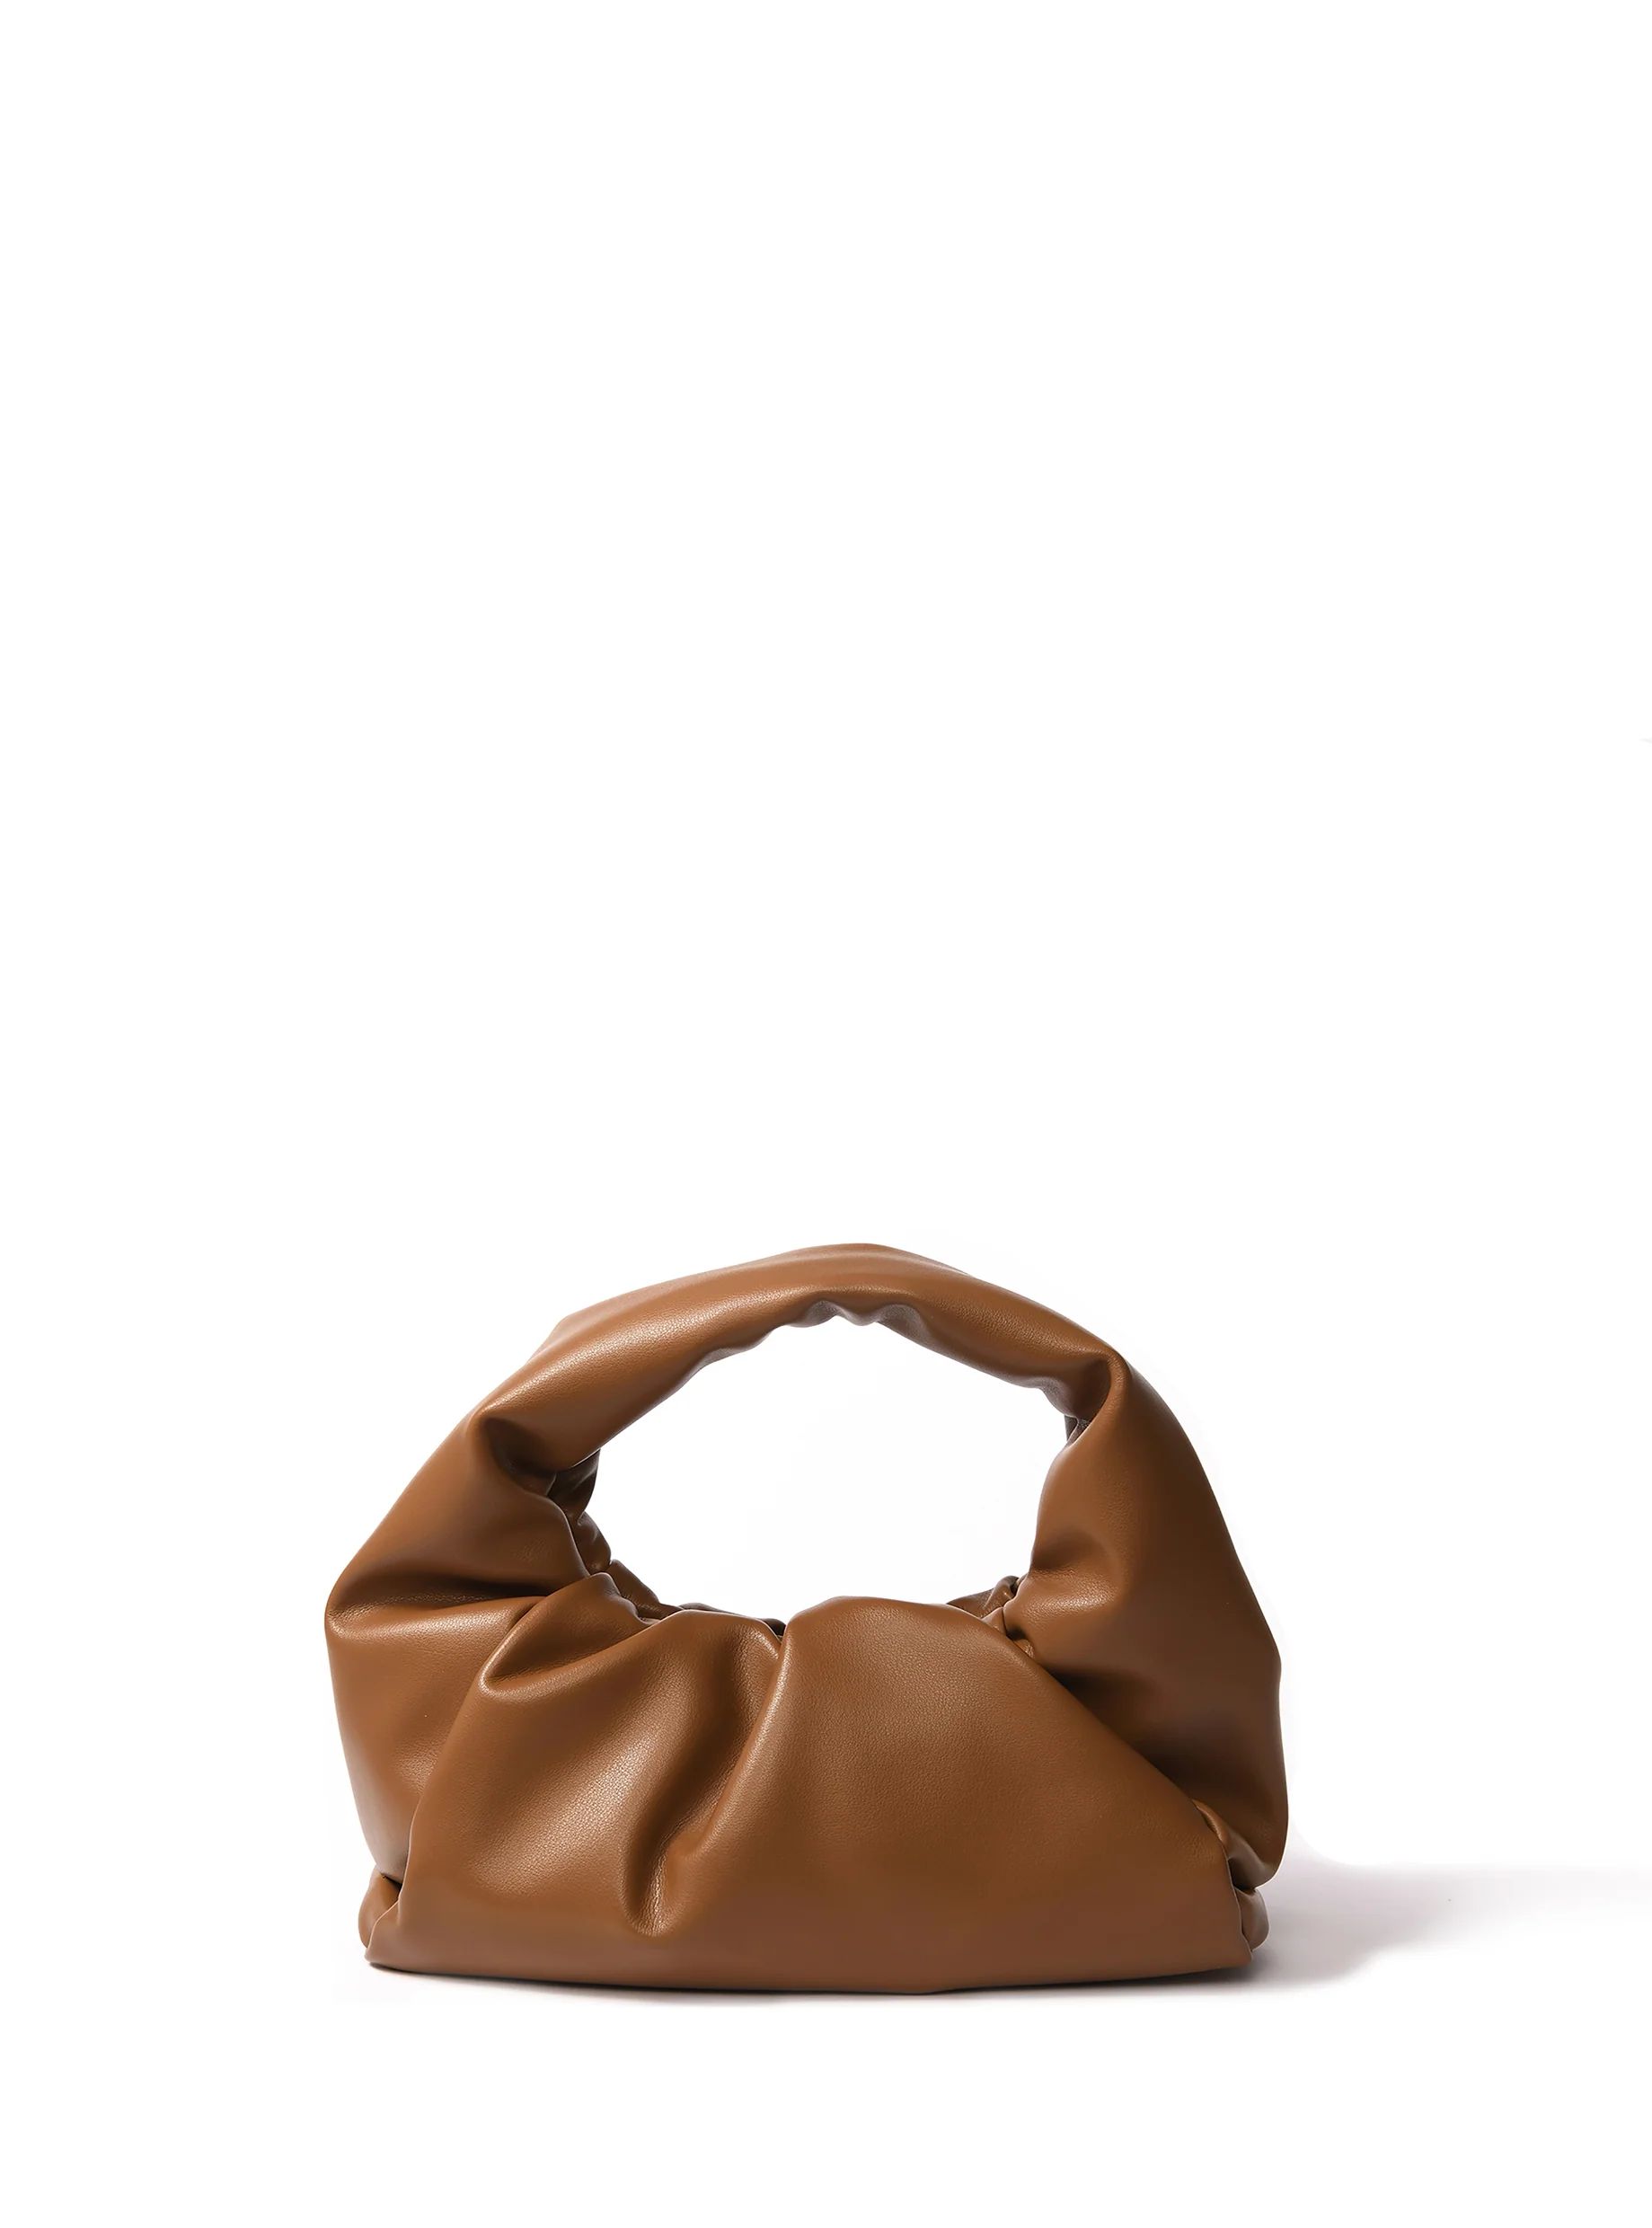 Marshmallow Croissant Bag in Soft Leather, Caramel | Bob Ore Blue Collection